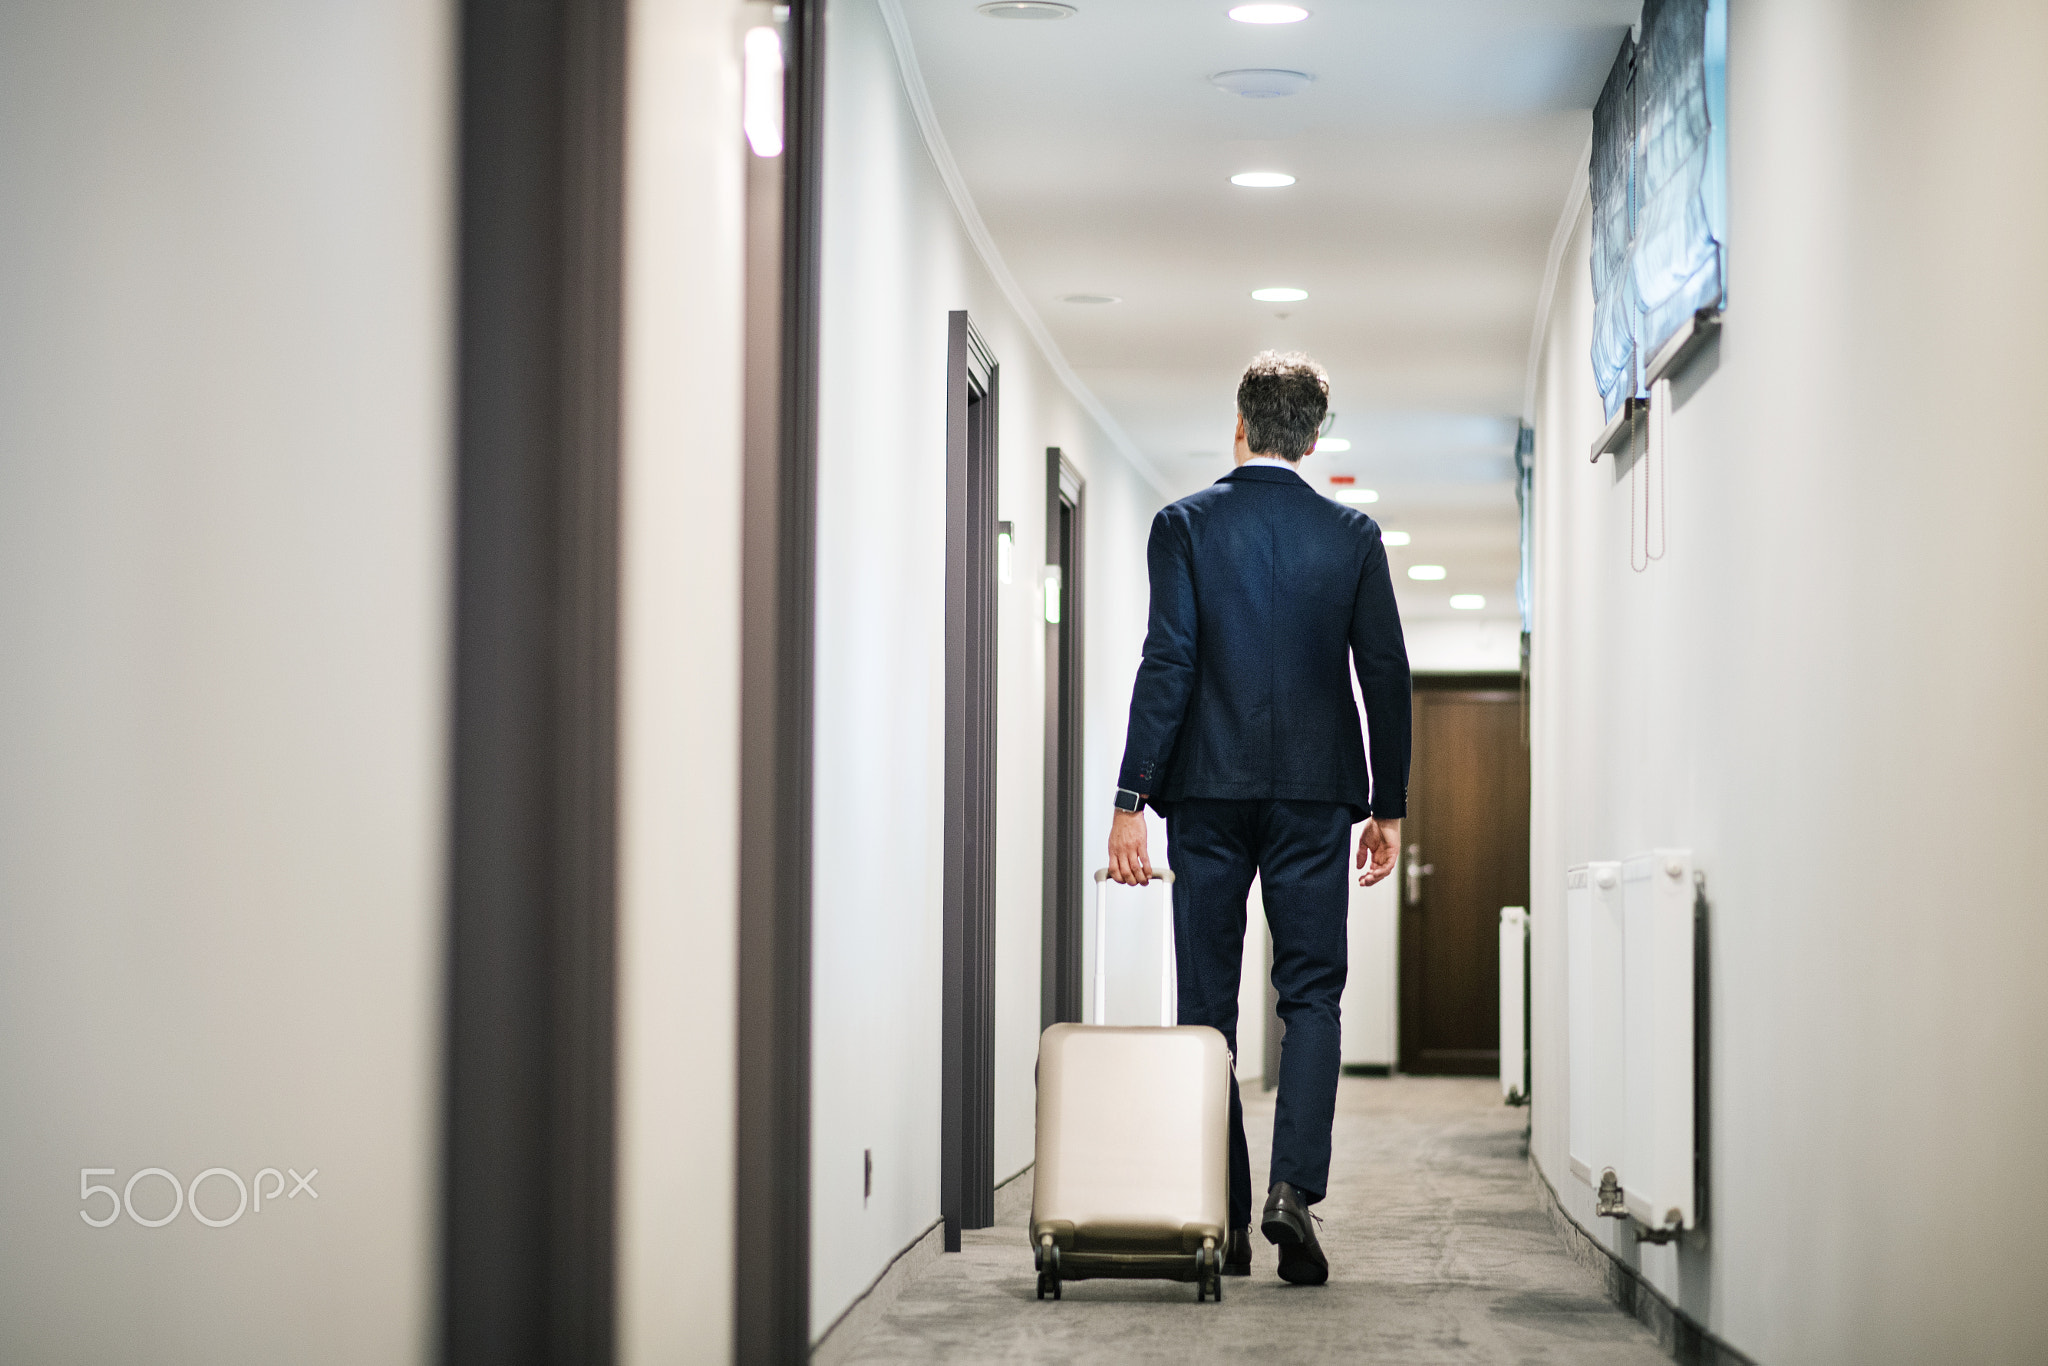 Mature businessman walking with luggage in a hotel corridor.